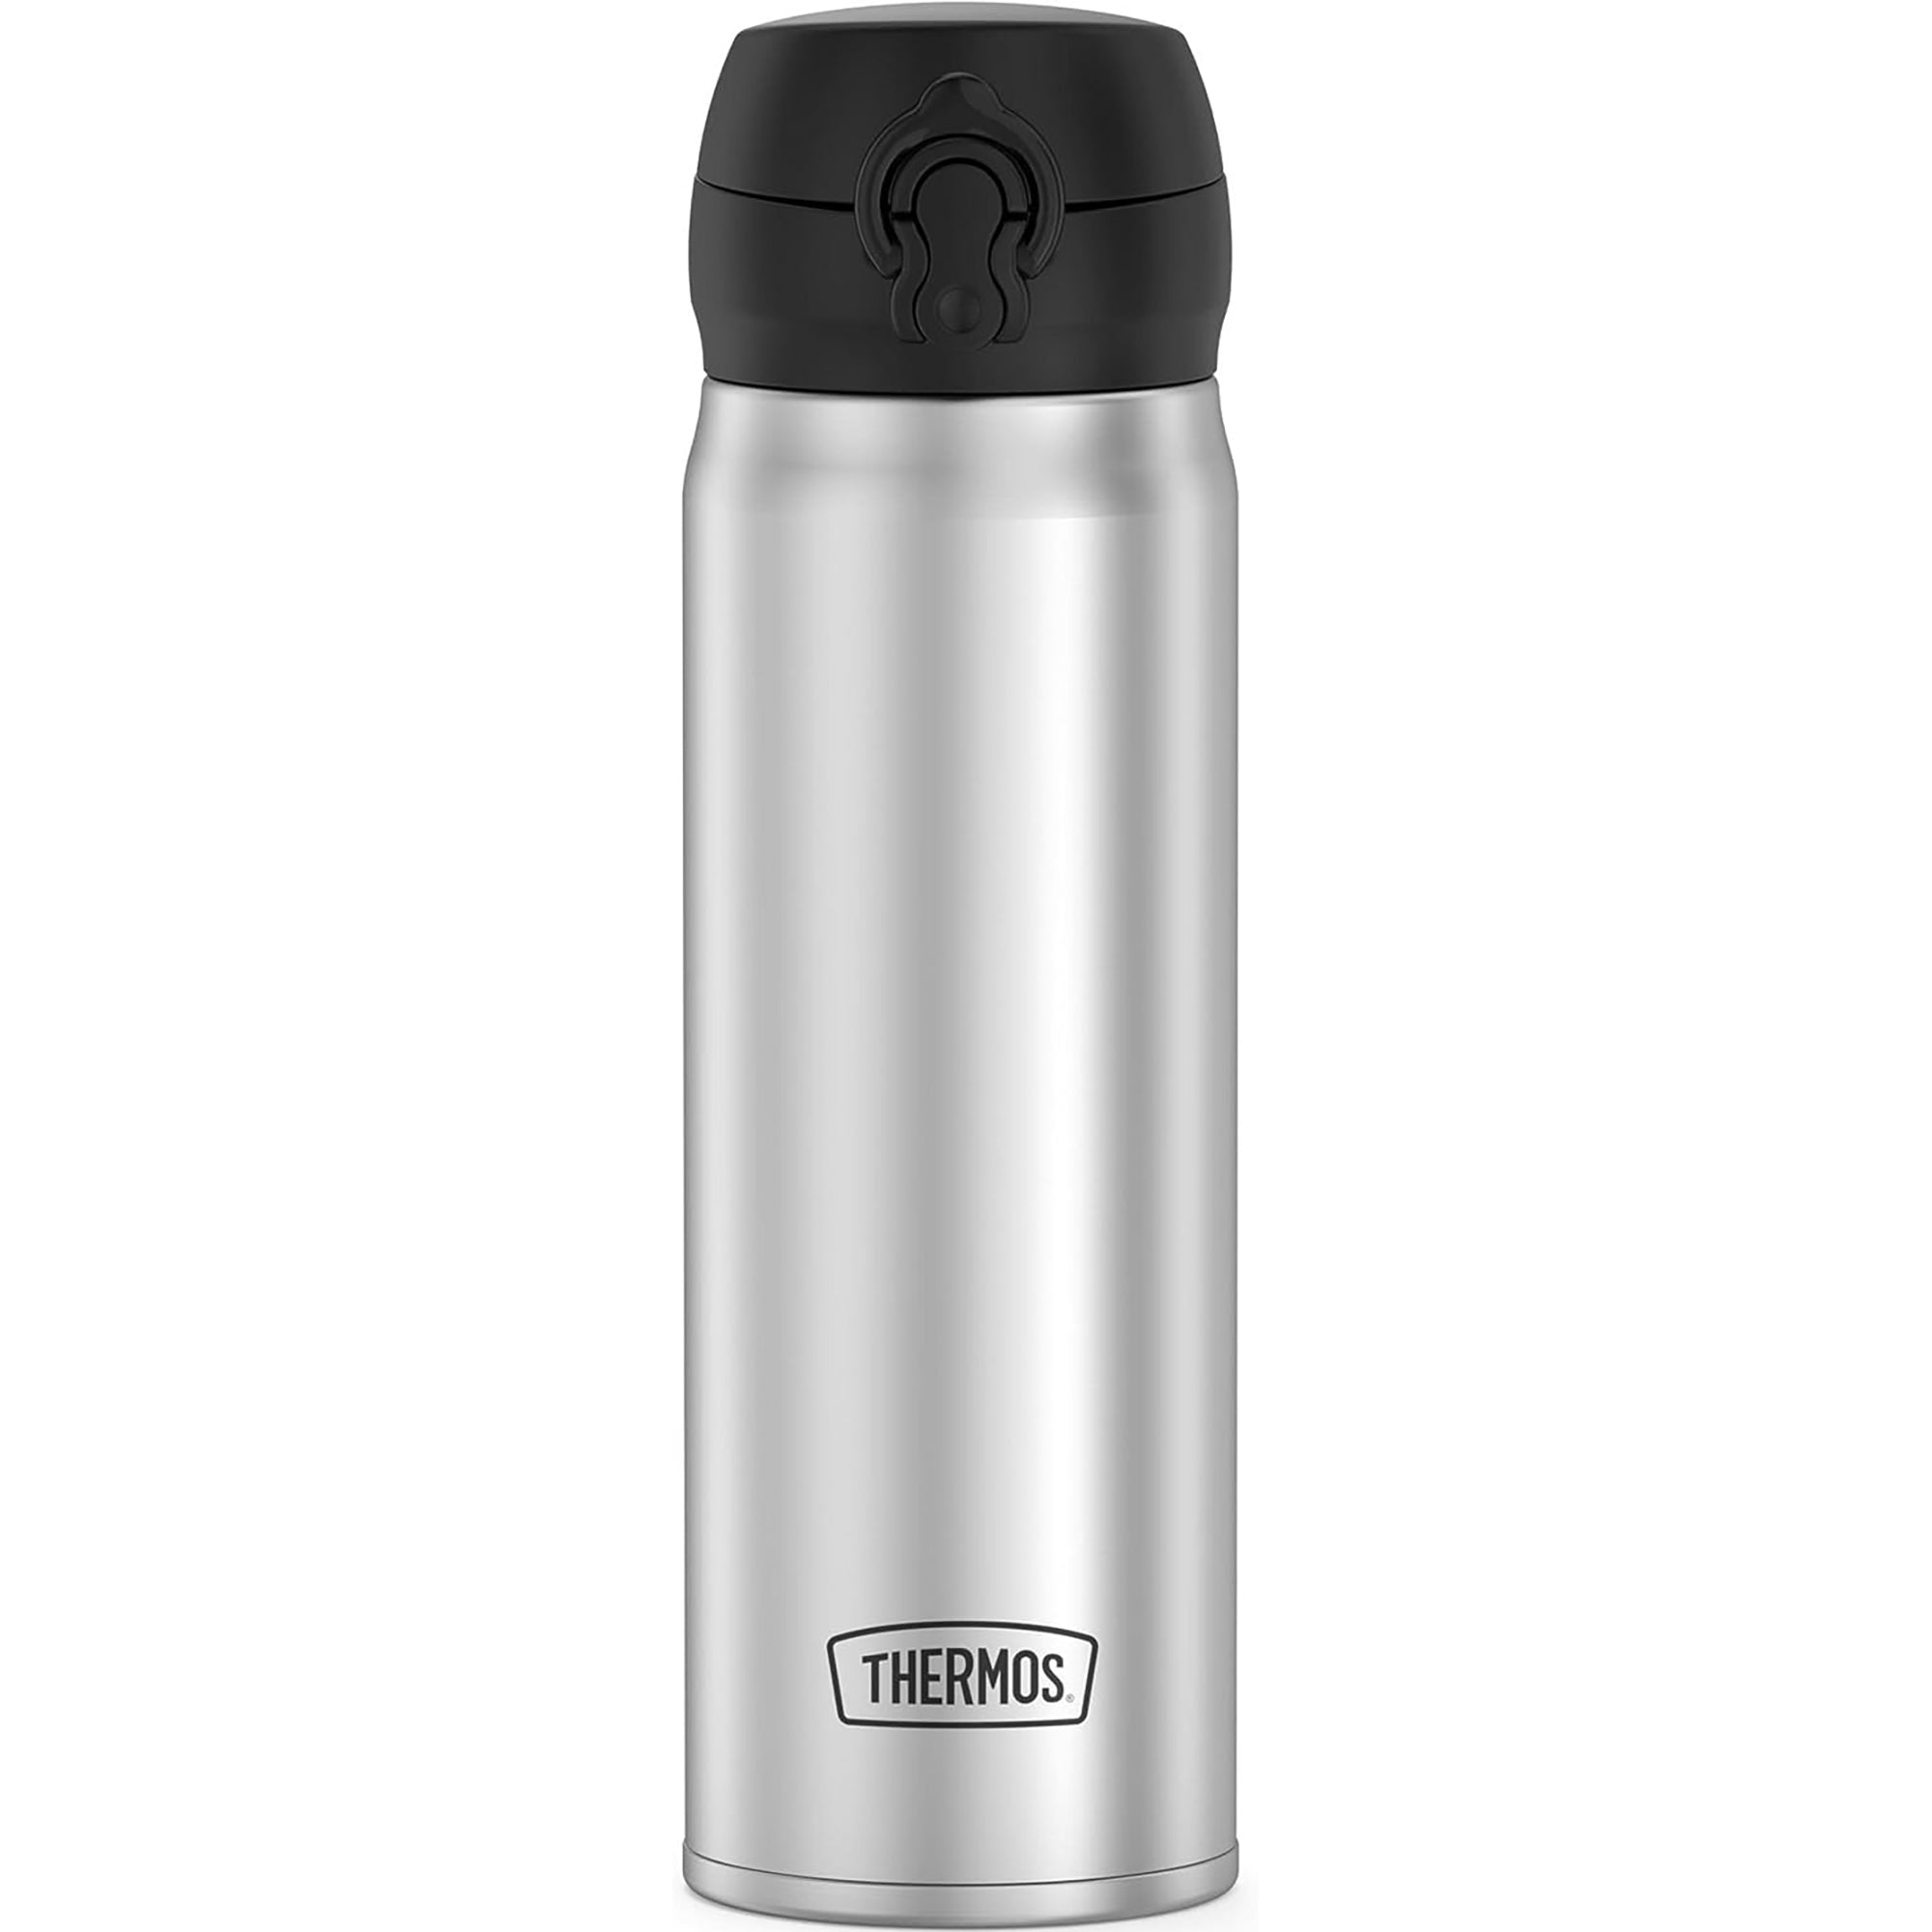 Thermos 16 oz. Vacuum Insulated Stainless Steel Direct Drink Bottle Thermos